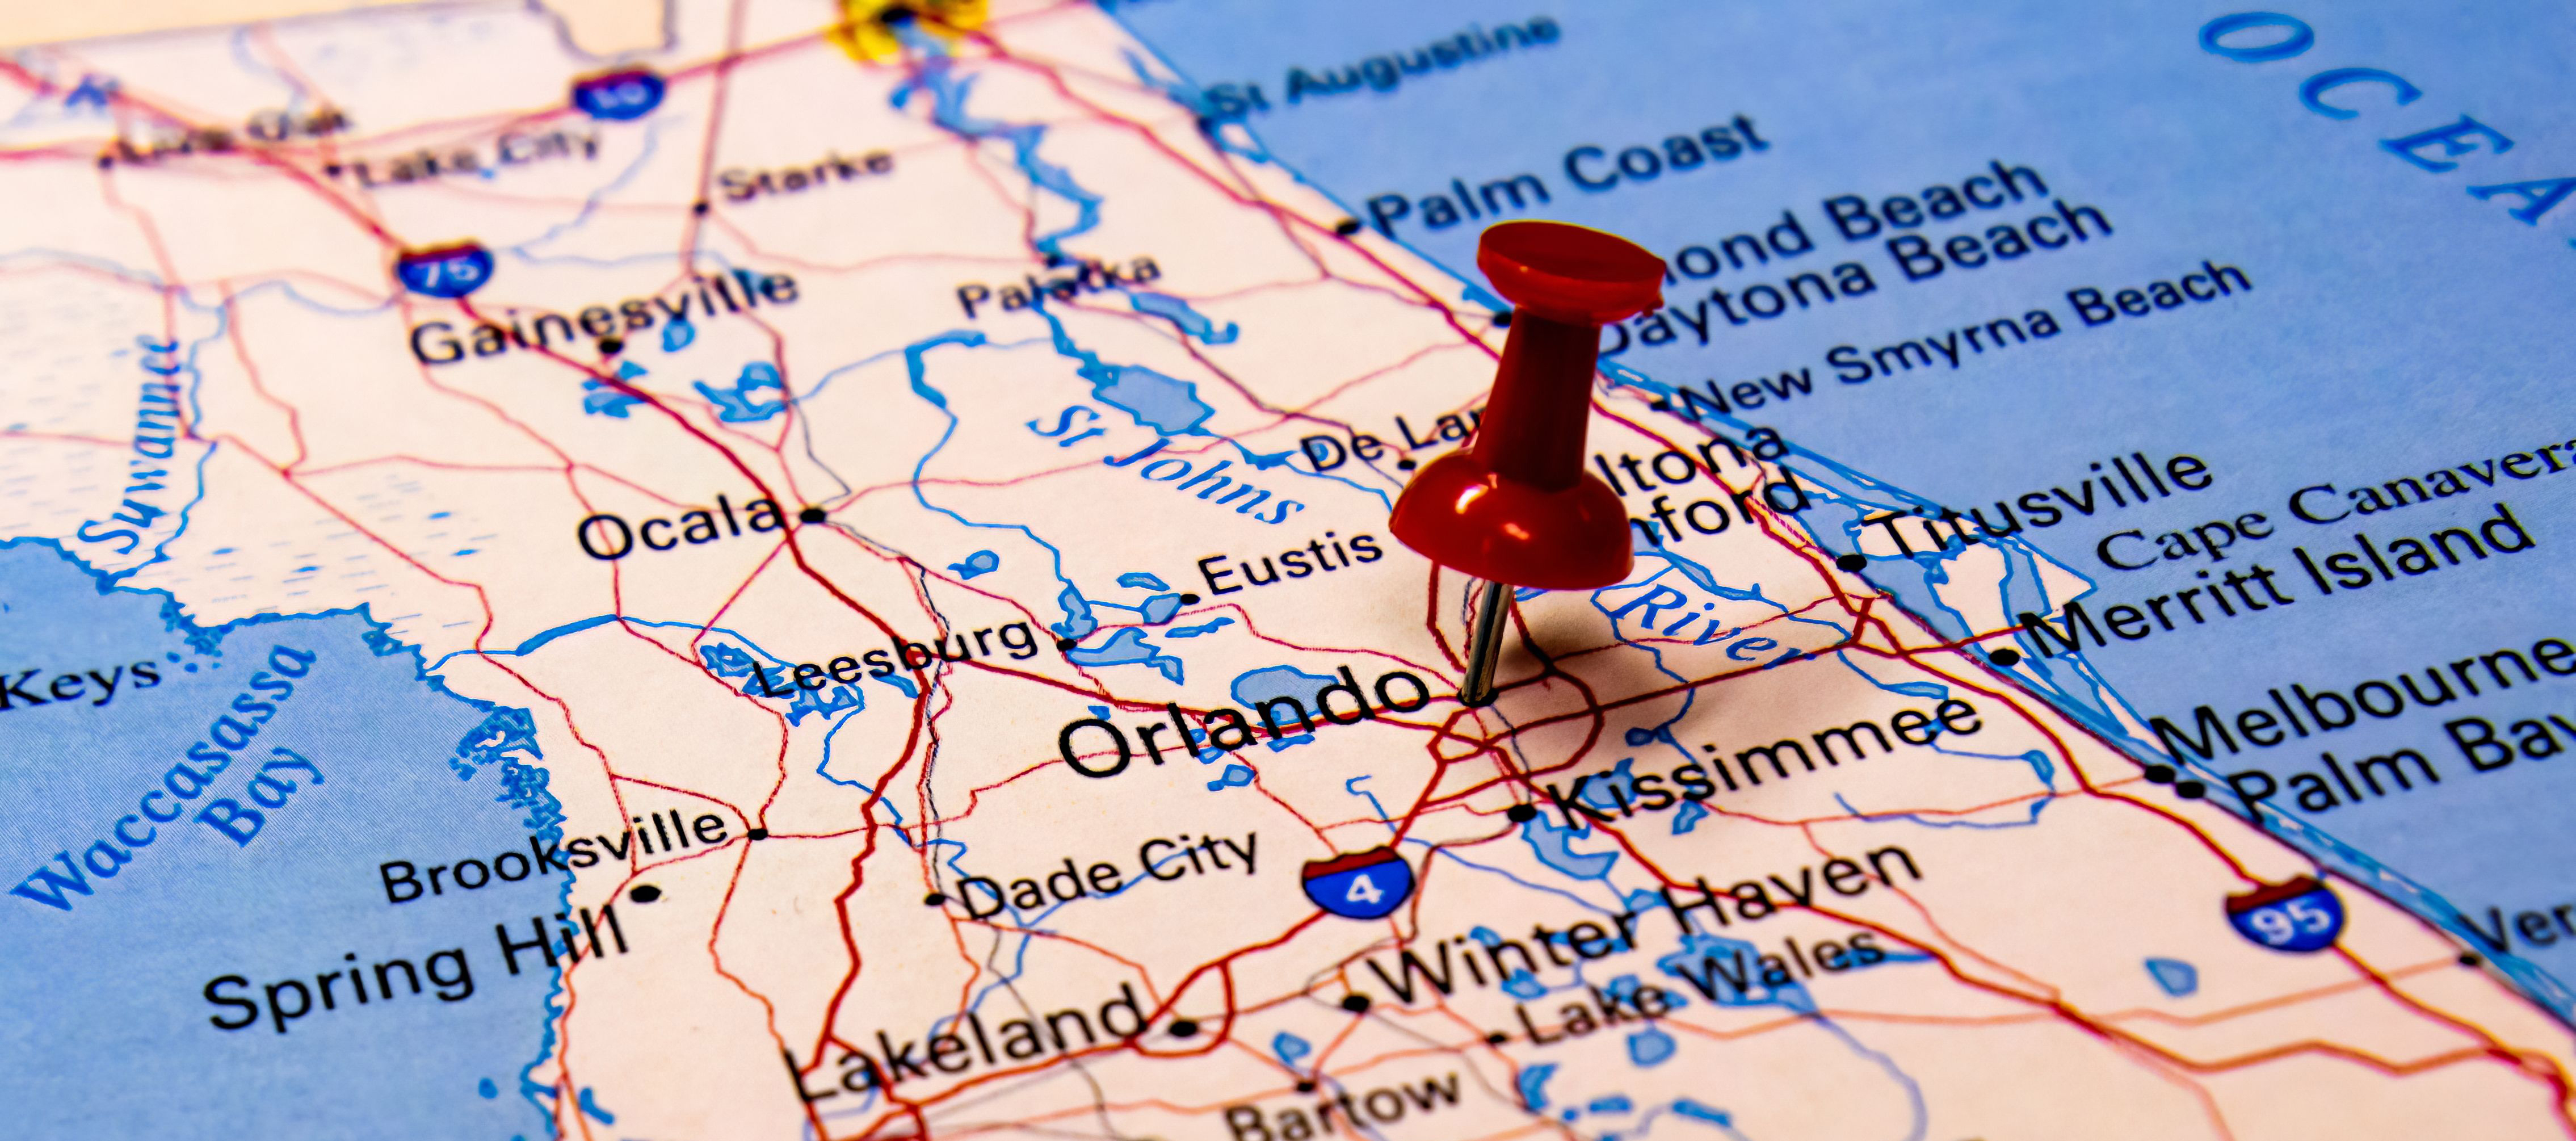 Map of Florida with a thumb tack on Orlando, surrounding cities are shown